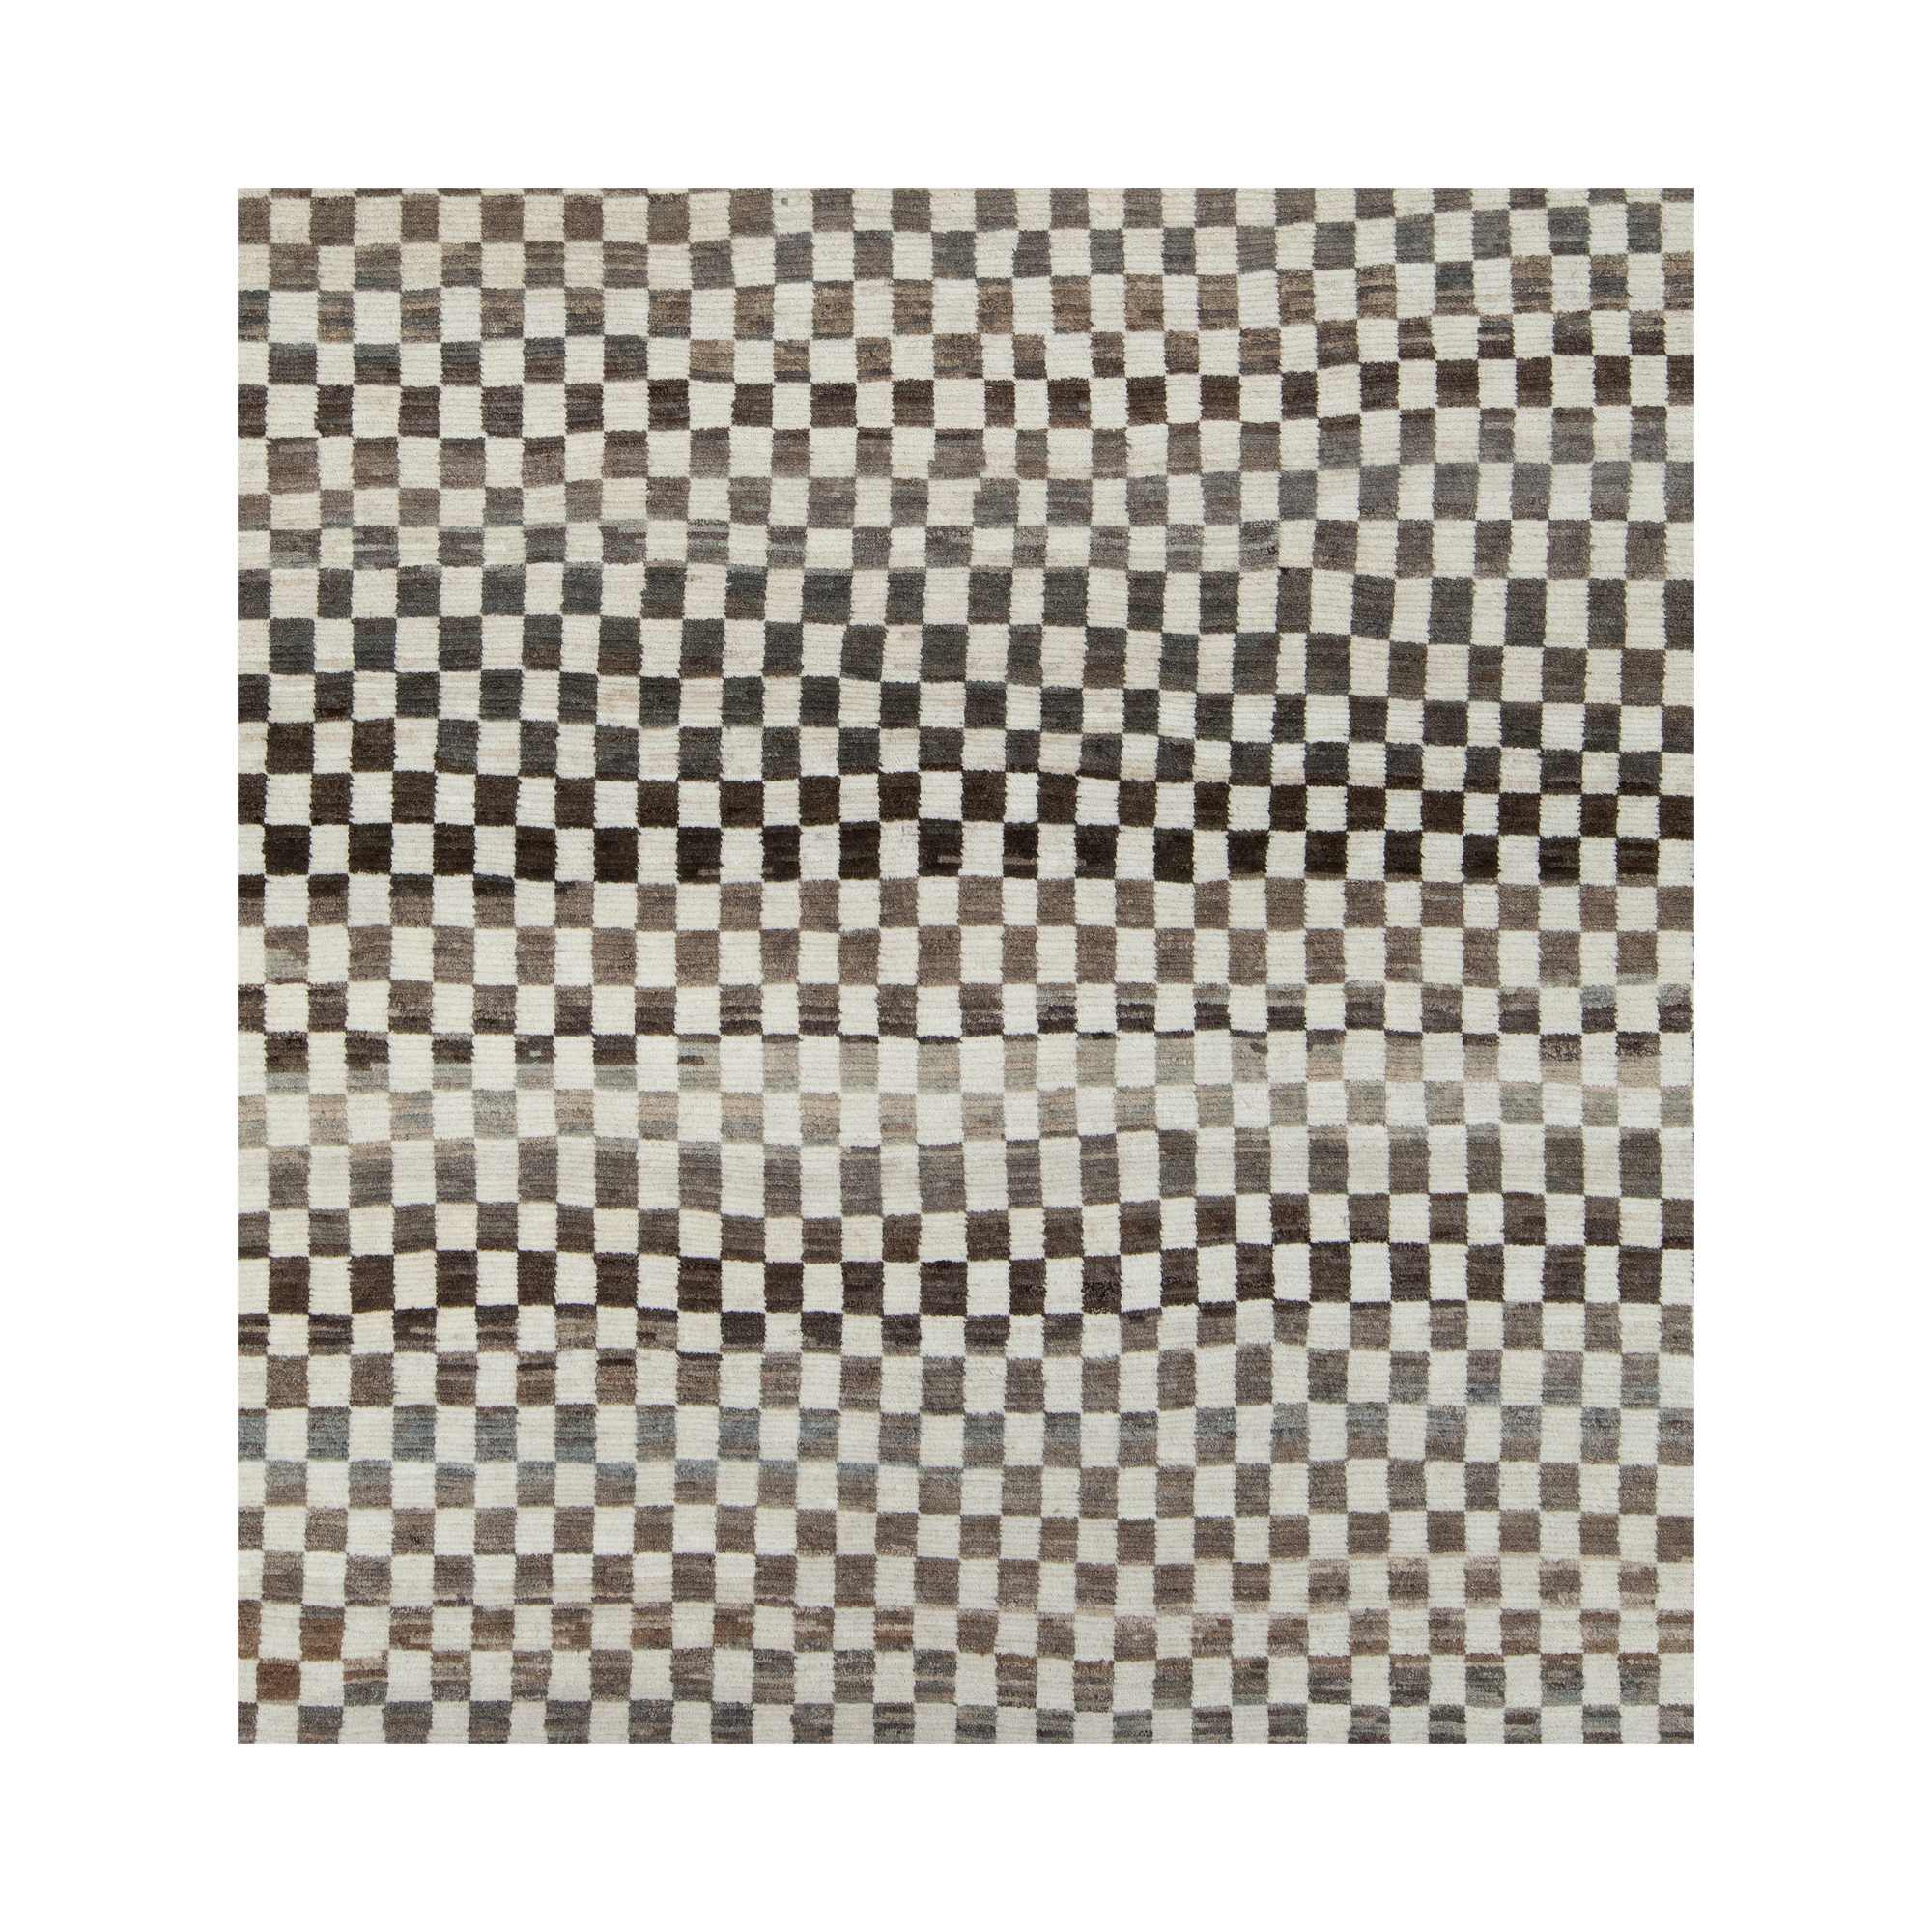 Checkered flatweave rug that is hand-knotted and made from the finest handspun undyed wool. 